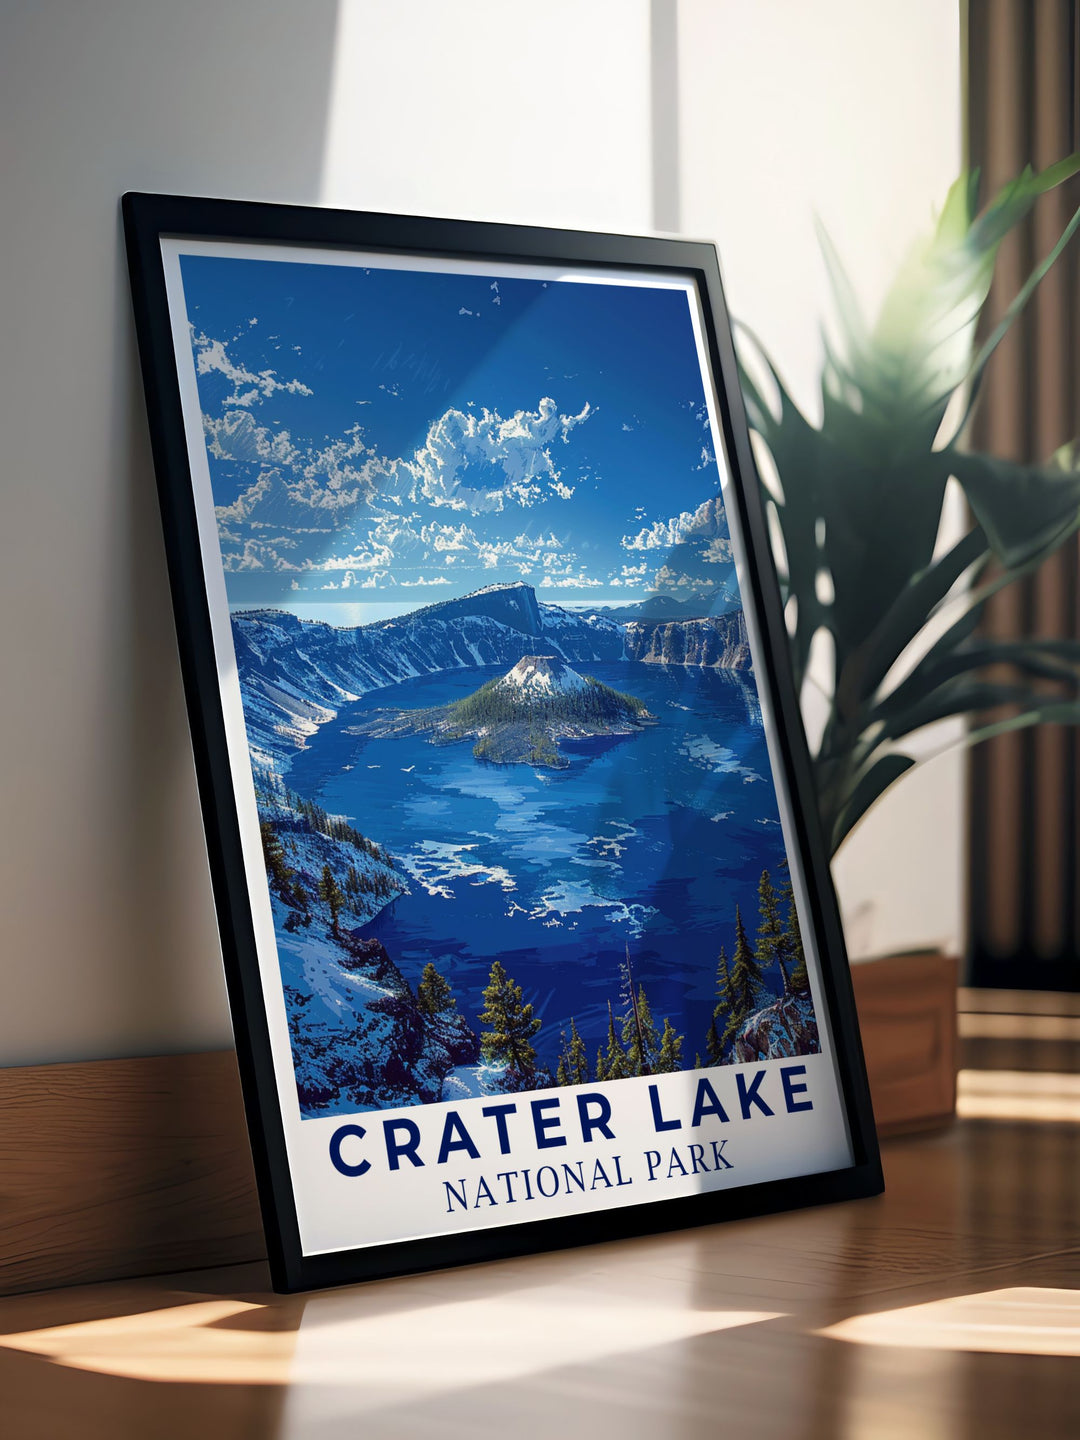 Beautiful Crater Lake artwork ideal for nature enthusiasts and collectors. These National Park Posters capture the breathtaking scenery of Crater Lake and its majestic caldera adding a touch of natural wonder to any space.